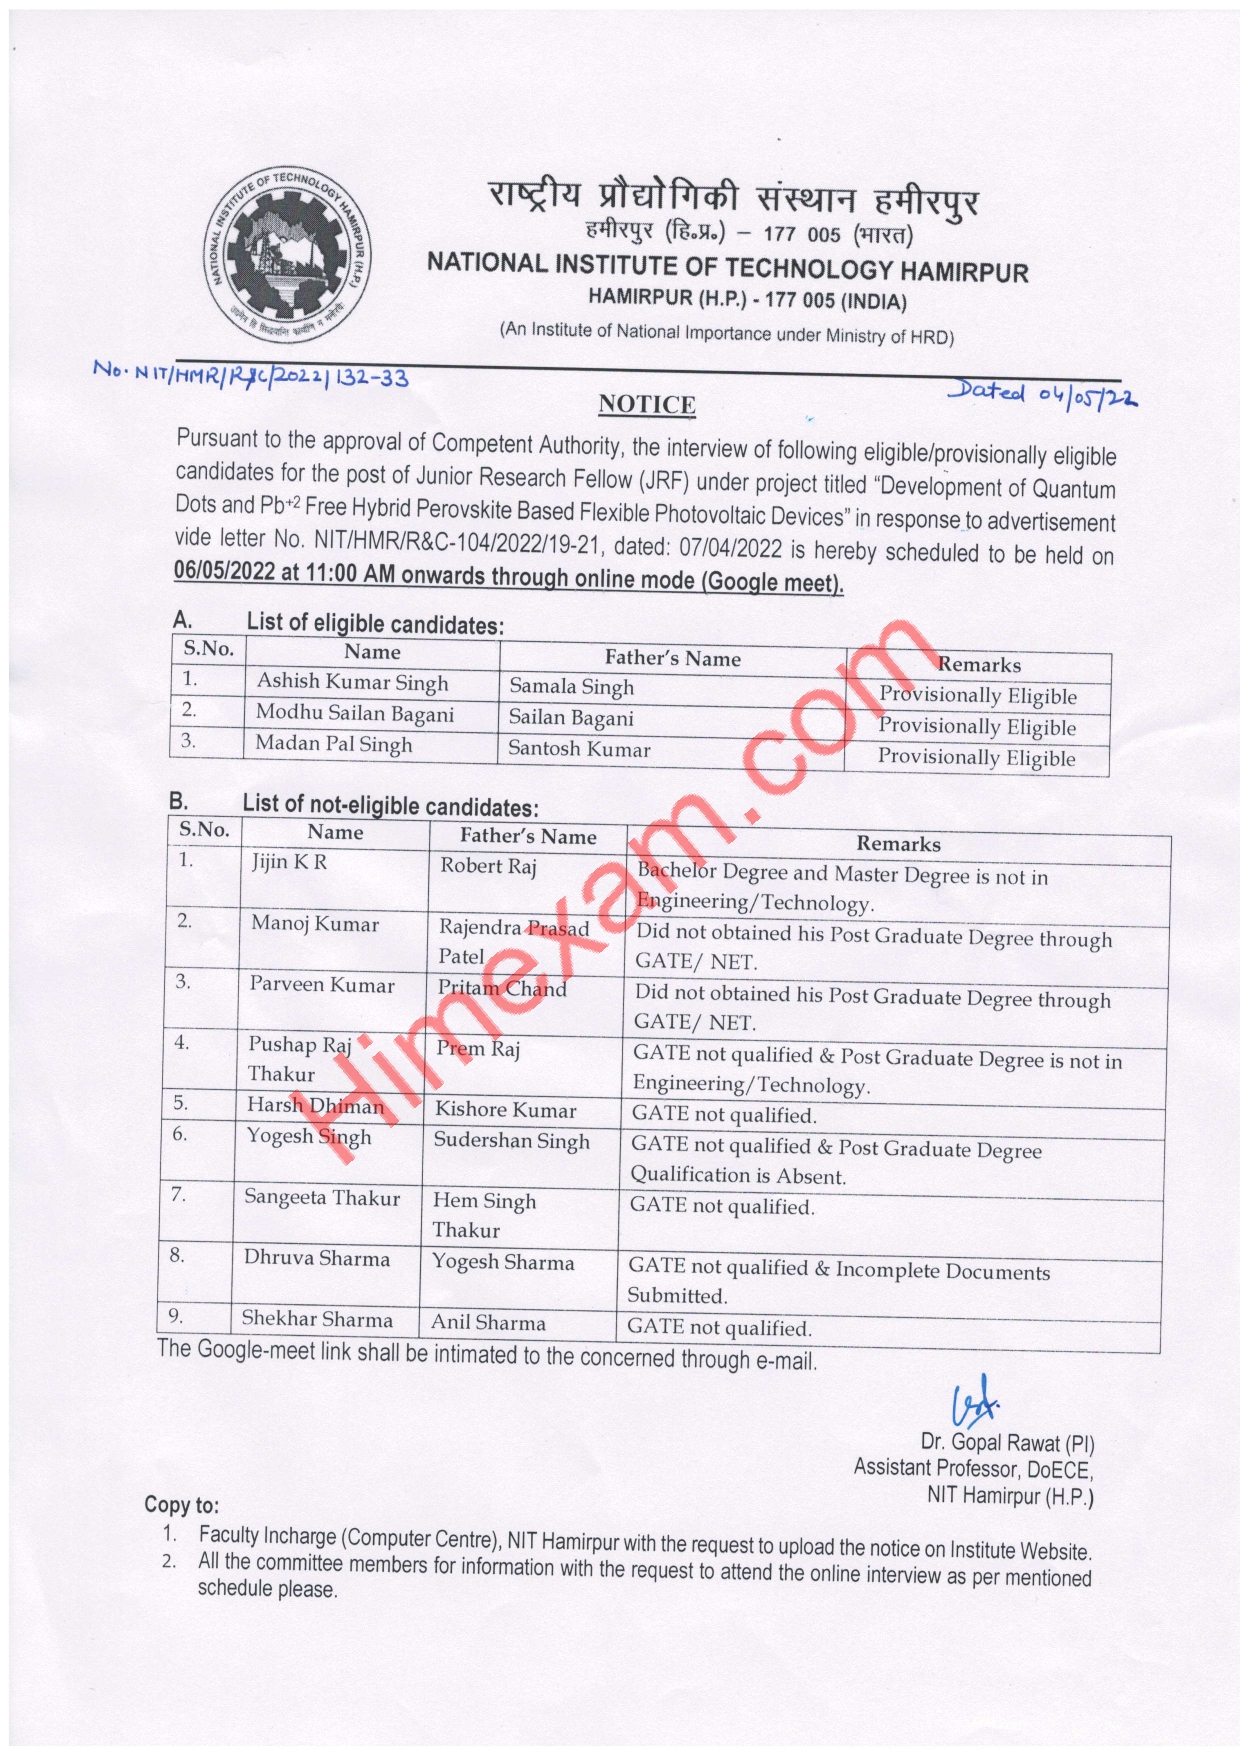 Notice regarding JRF Interview and Shortlisted Applications-NIT Hamirpur